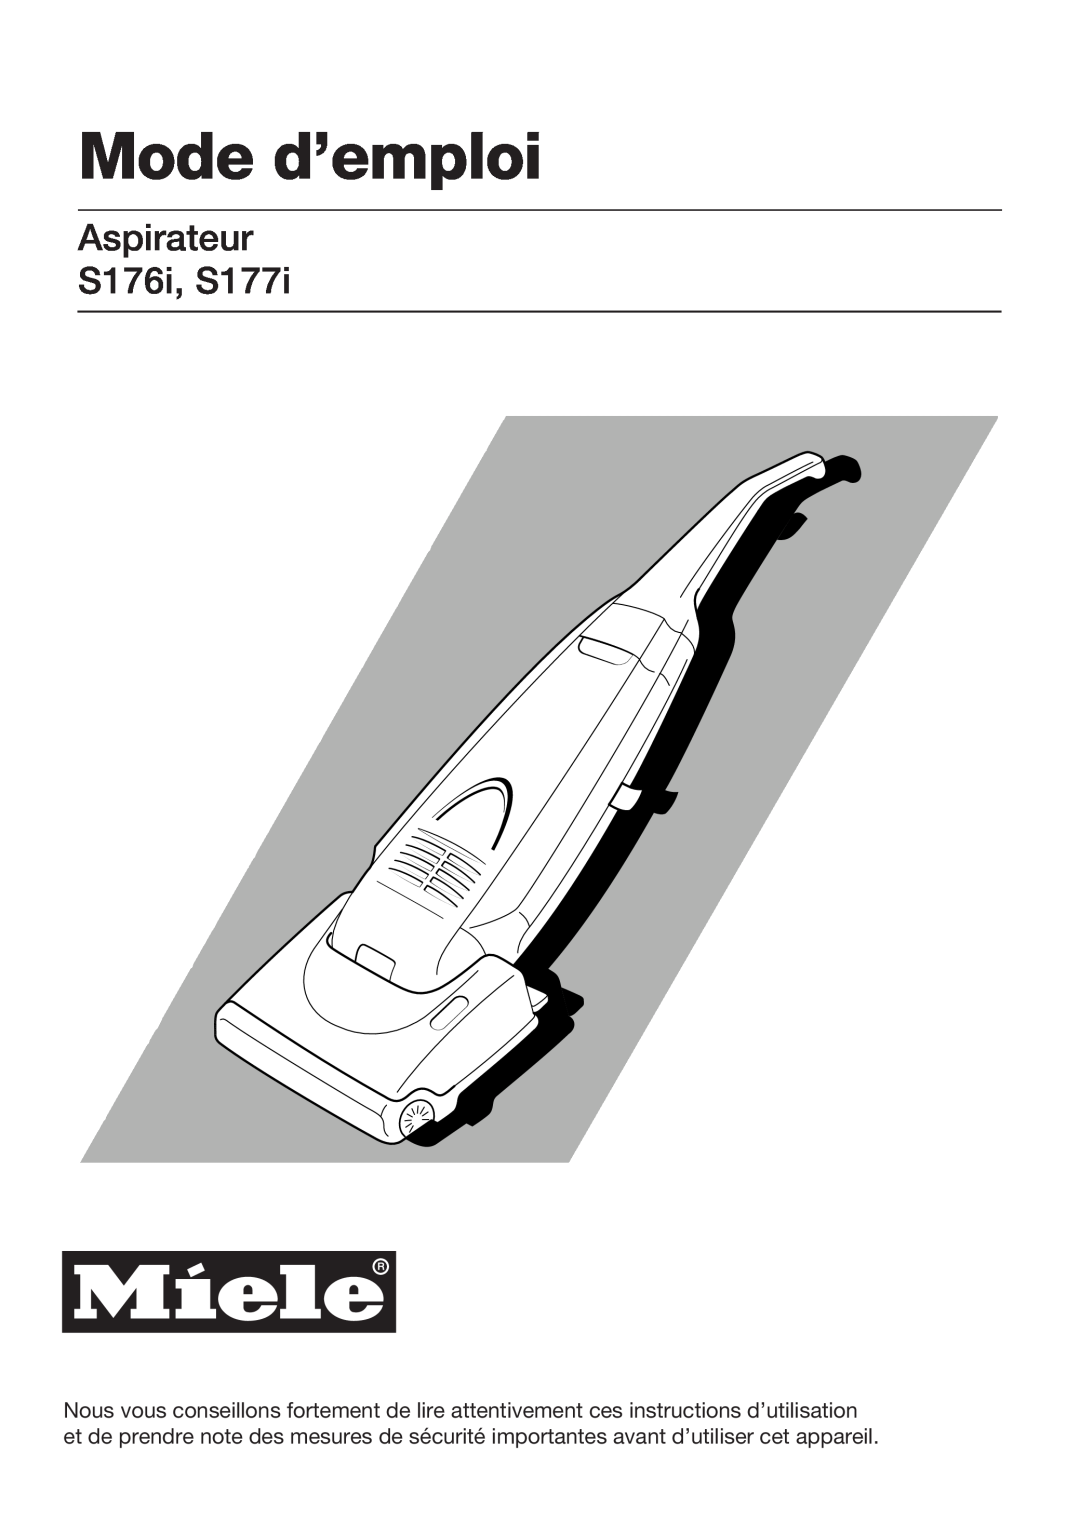 Miele important safety instructions Mode d’emploi, Aspirateur S176i, S177i 